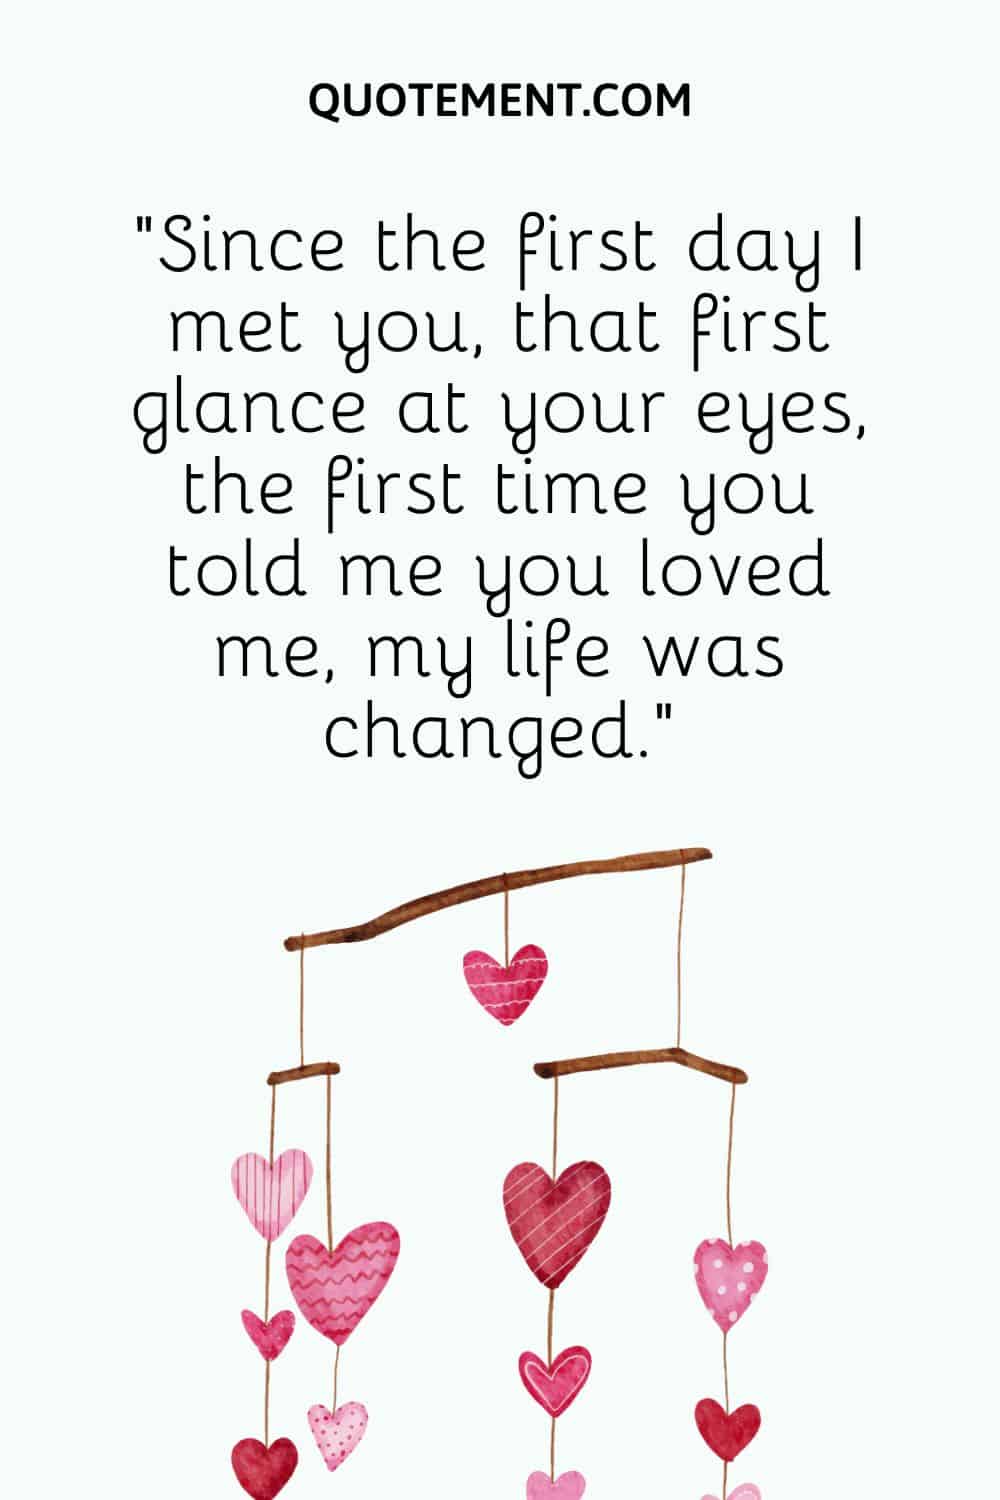 Since the first day I met you, that first glance at your eyes